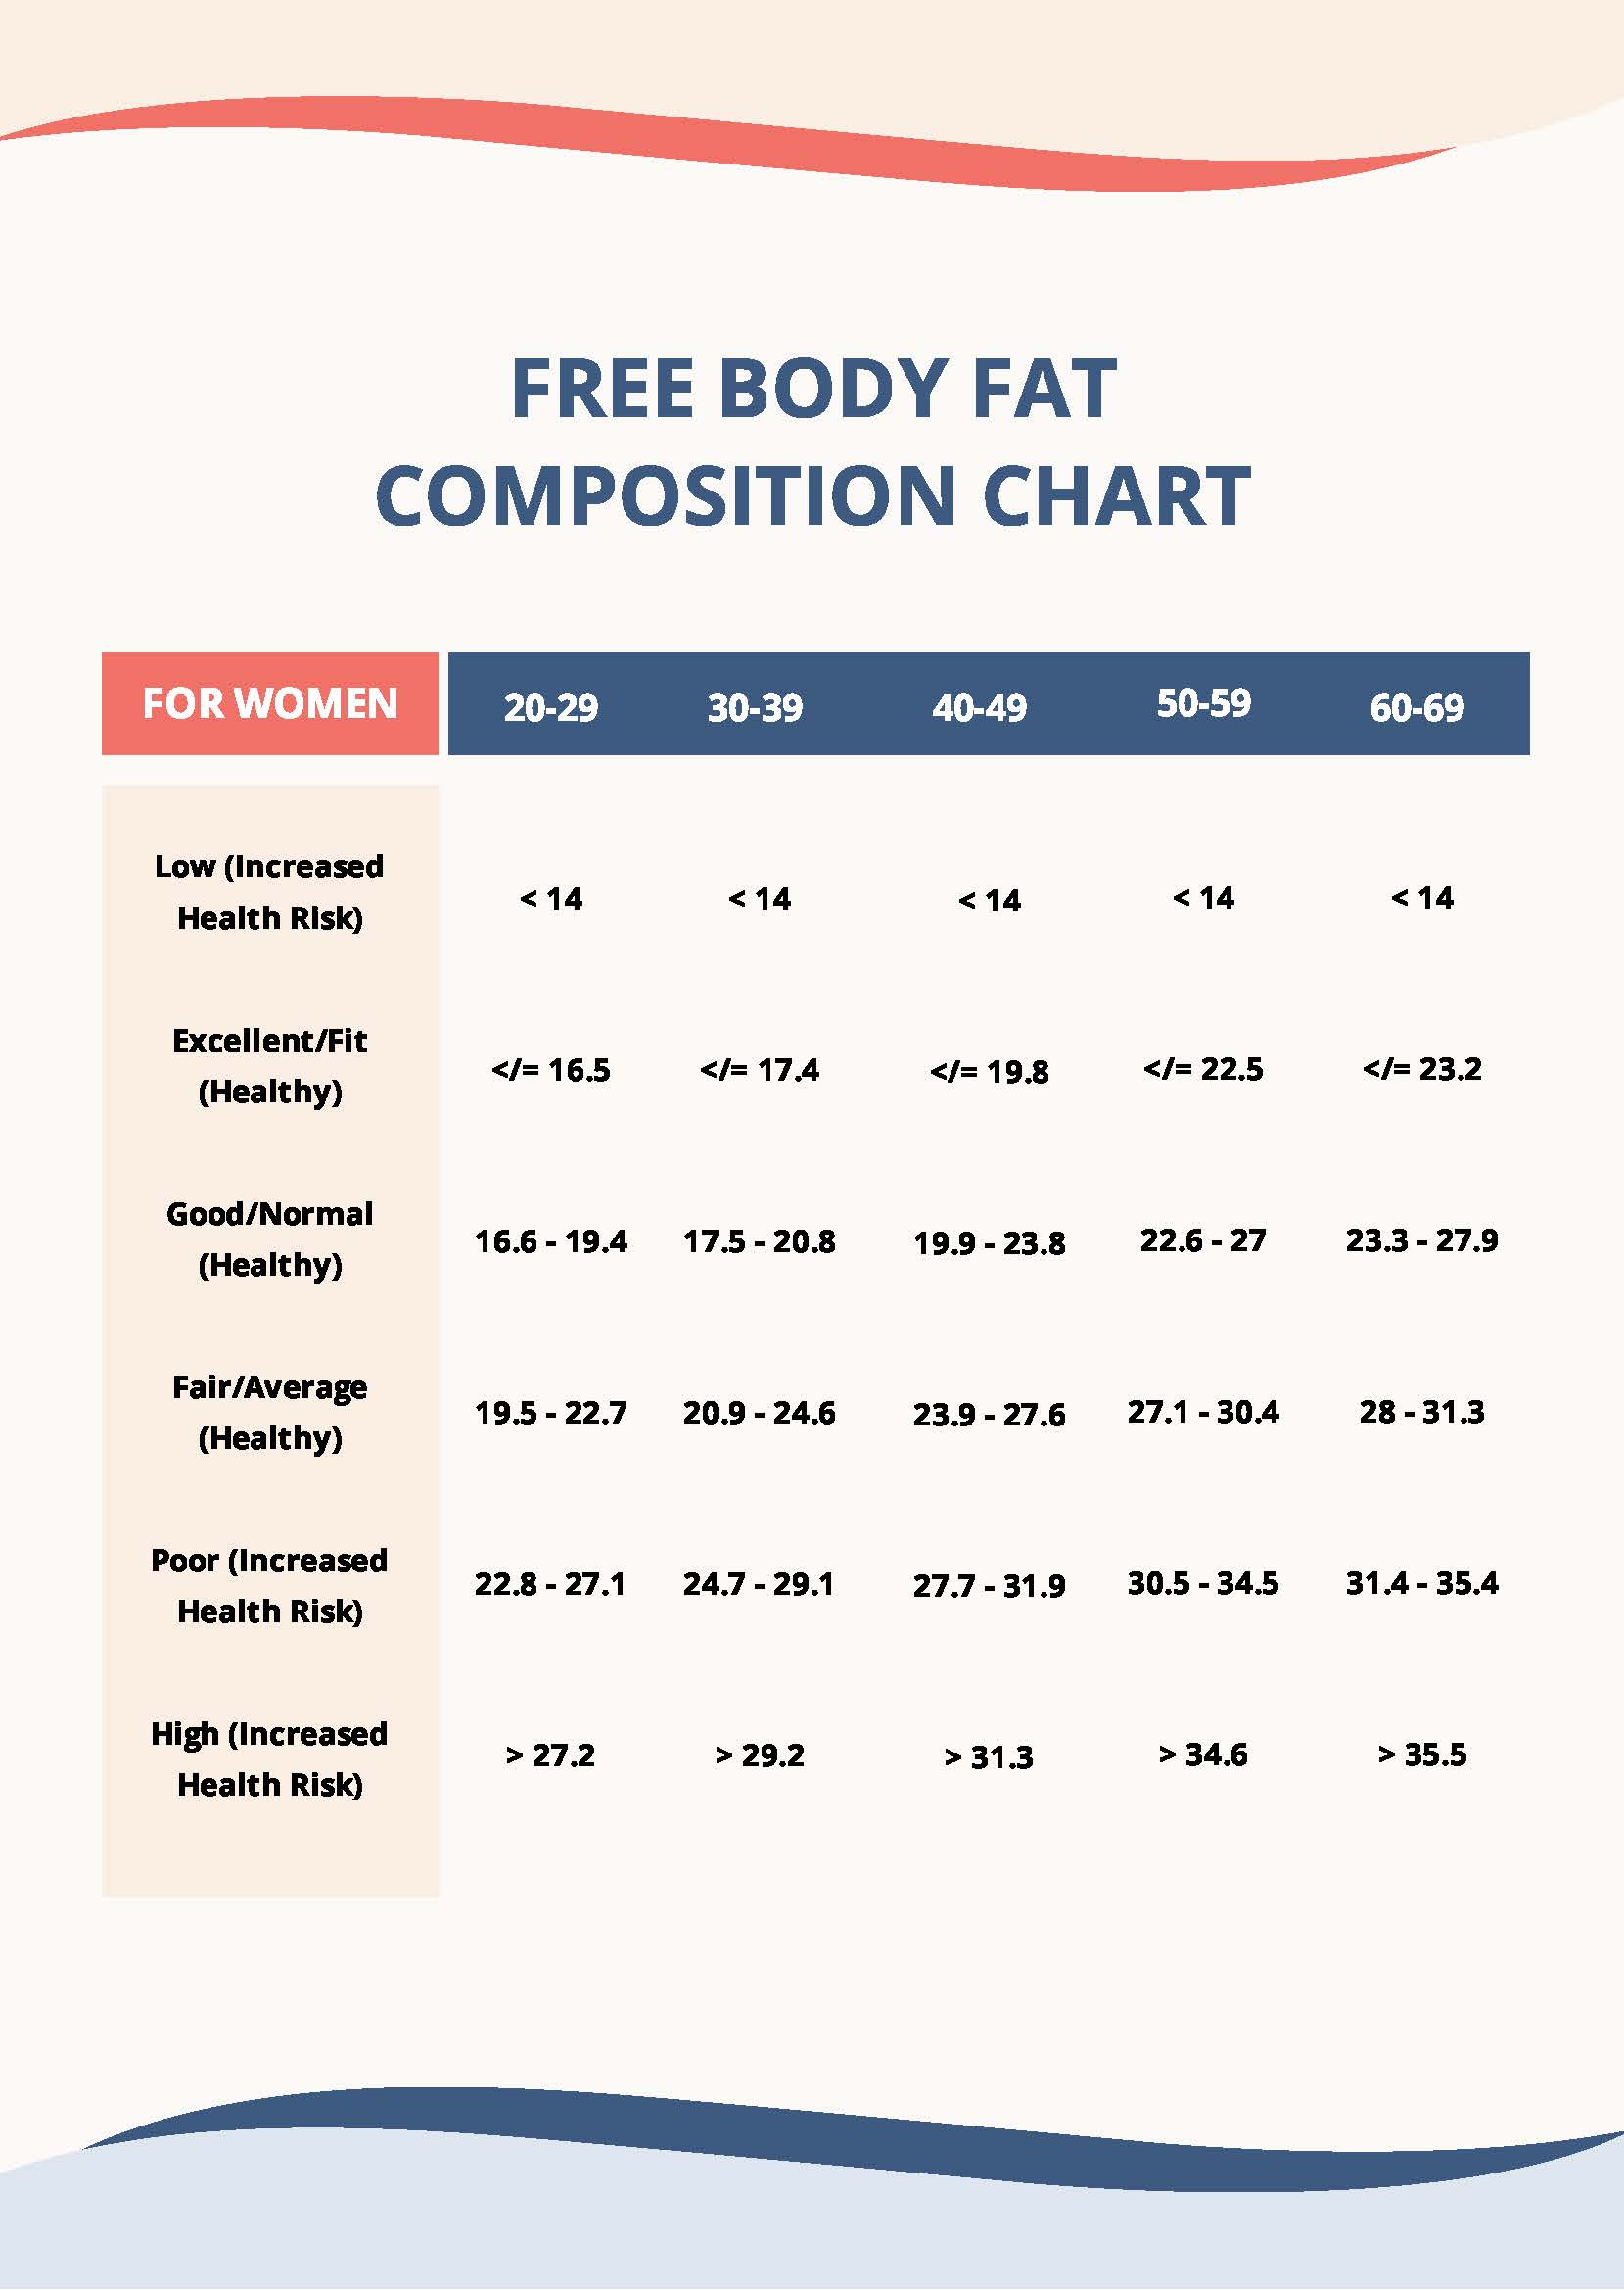 Body Fat Composition Chart in PDF